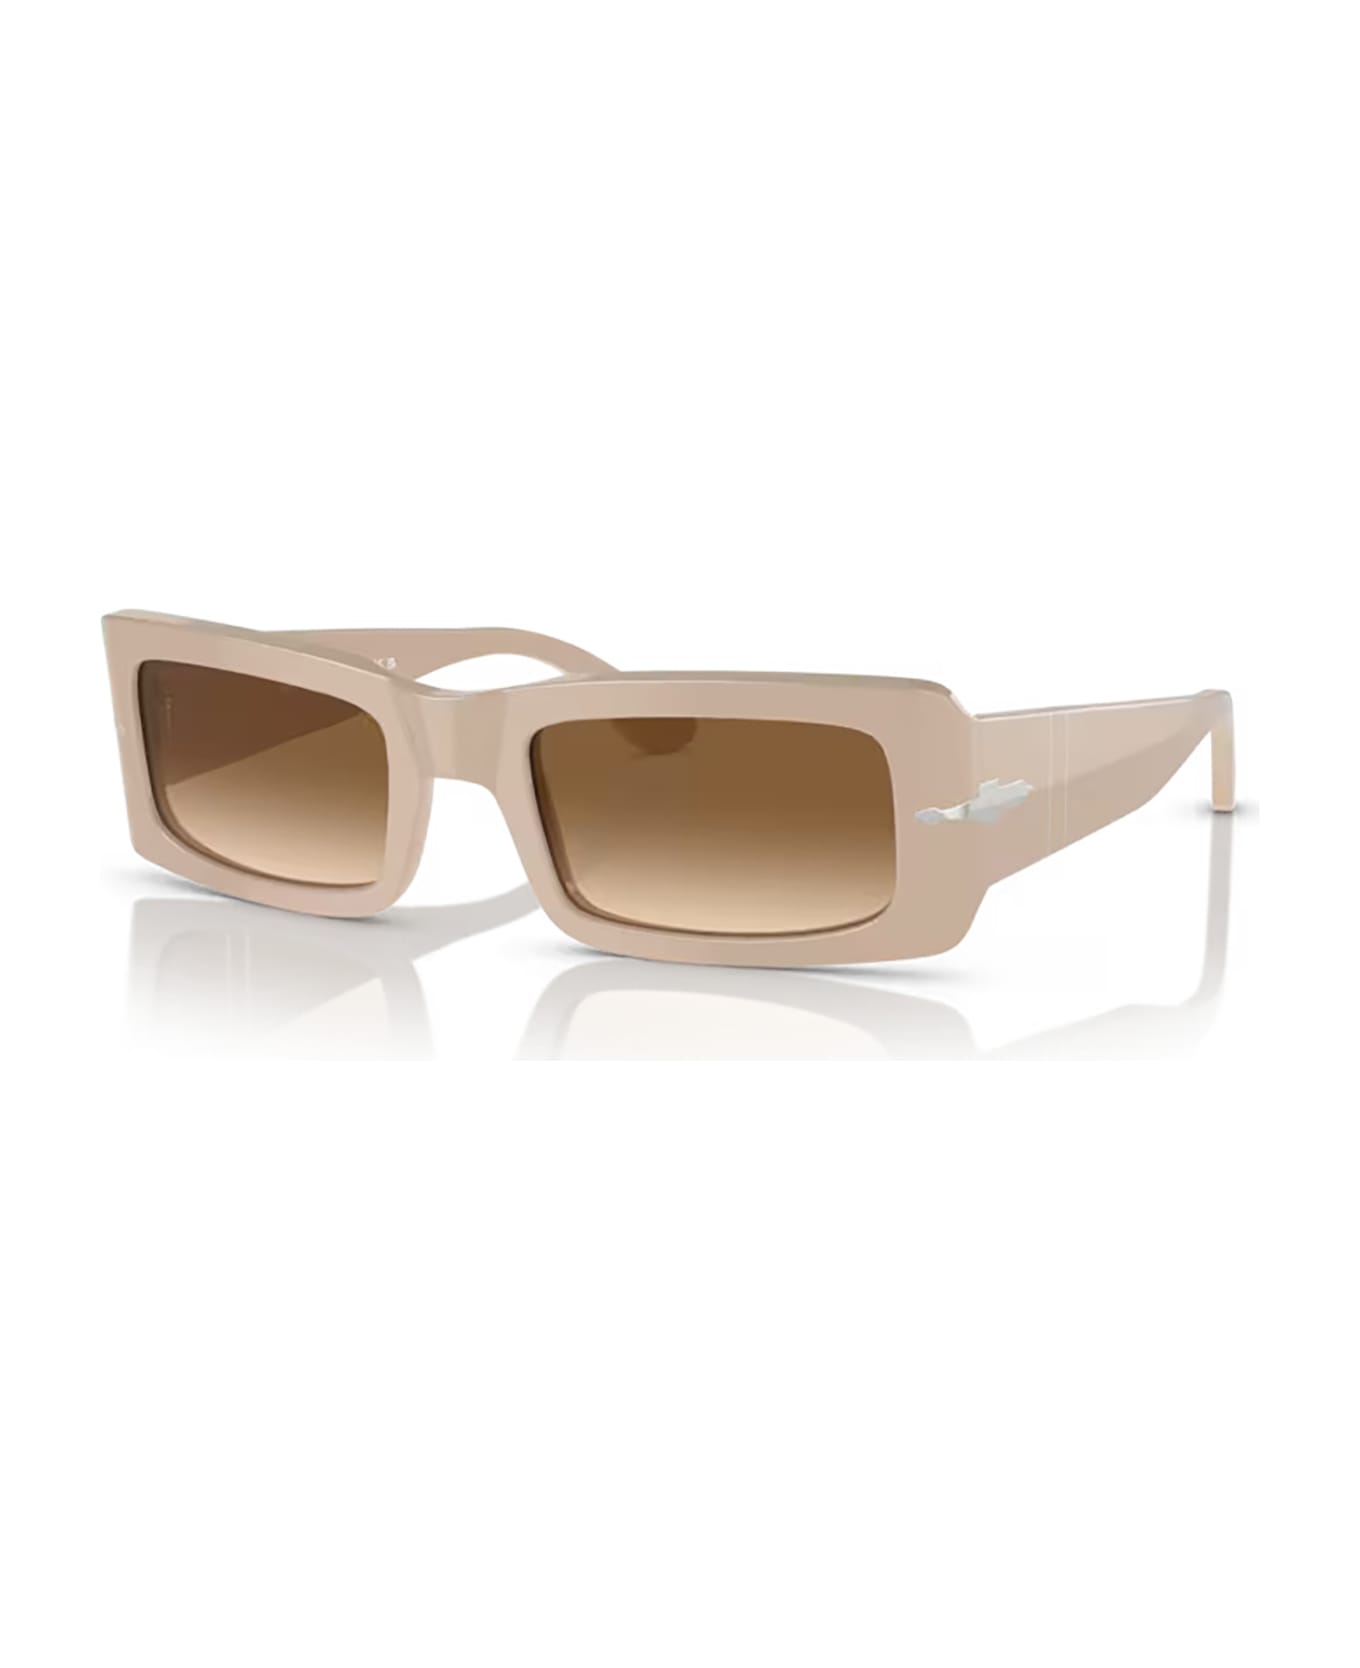 Persol Po3332s Solid Beige Sunglasses - Solid Beige サングラス